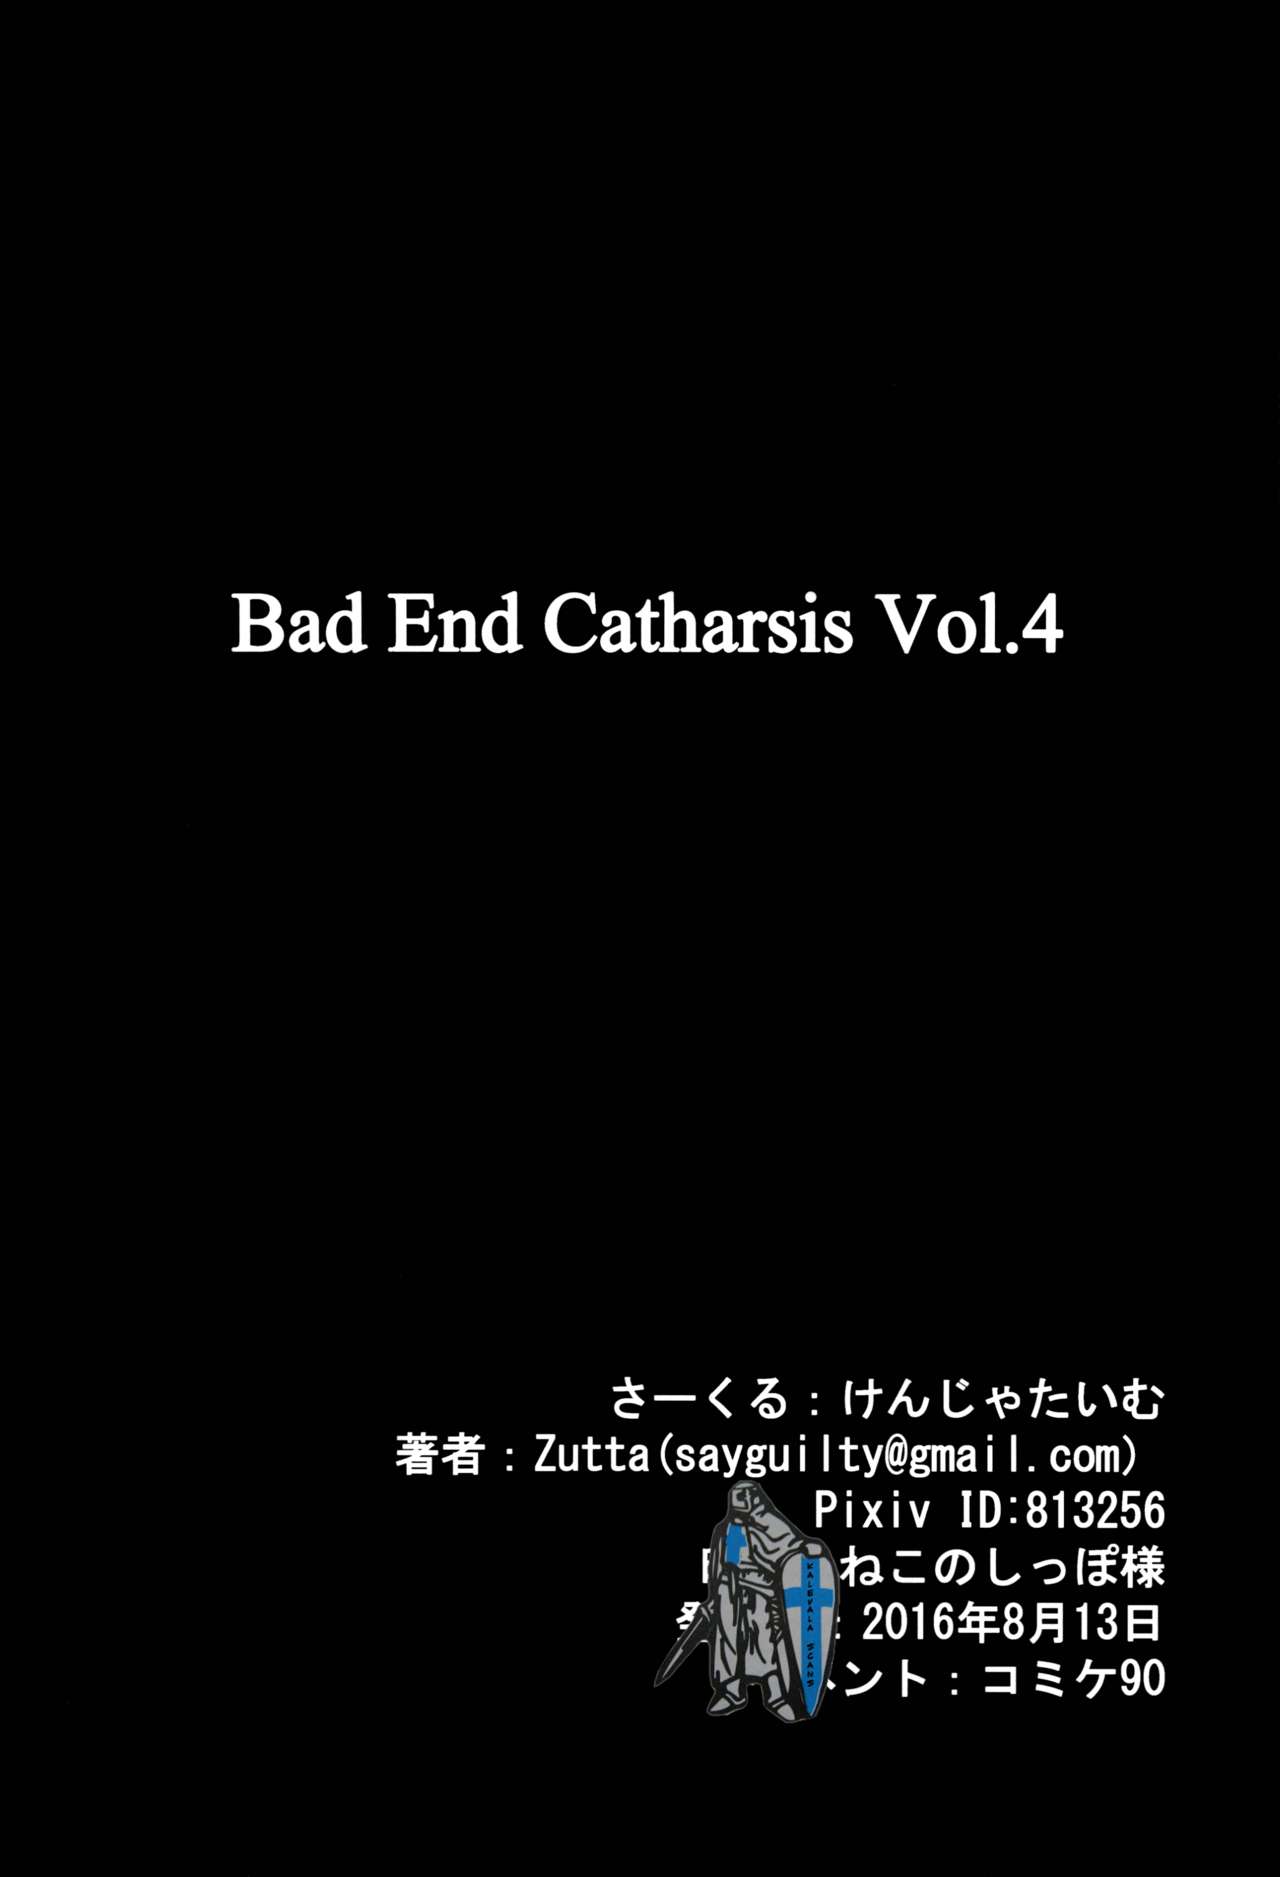 (C90) [Kenja Time (Zutta)] BAD END CATHARSIS Vol.4 (Granblue Fantasy) page 18 full